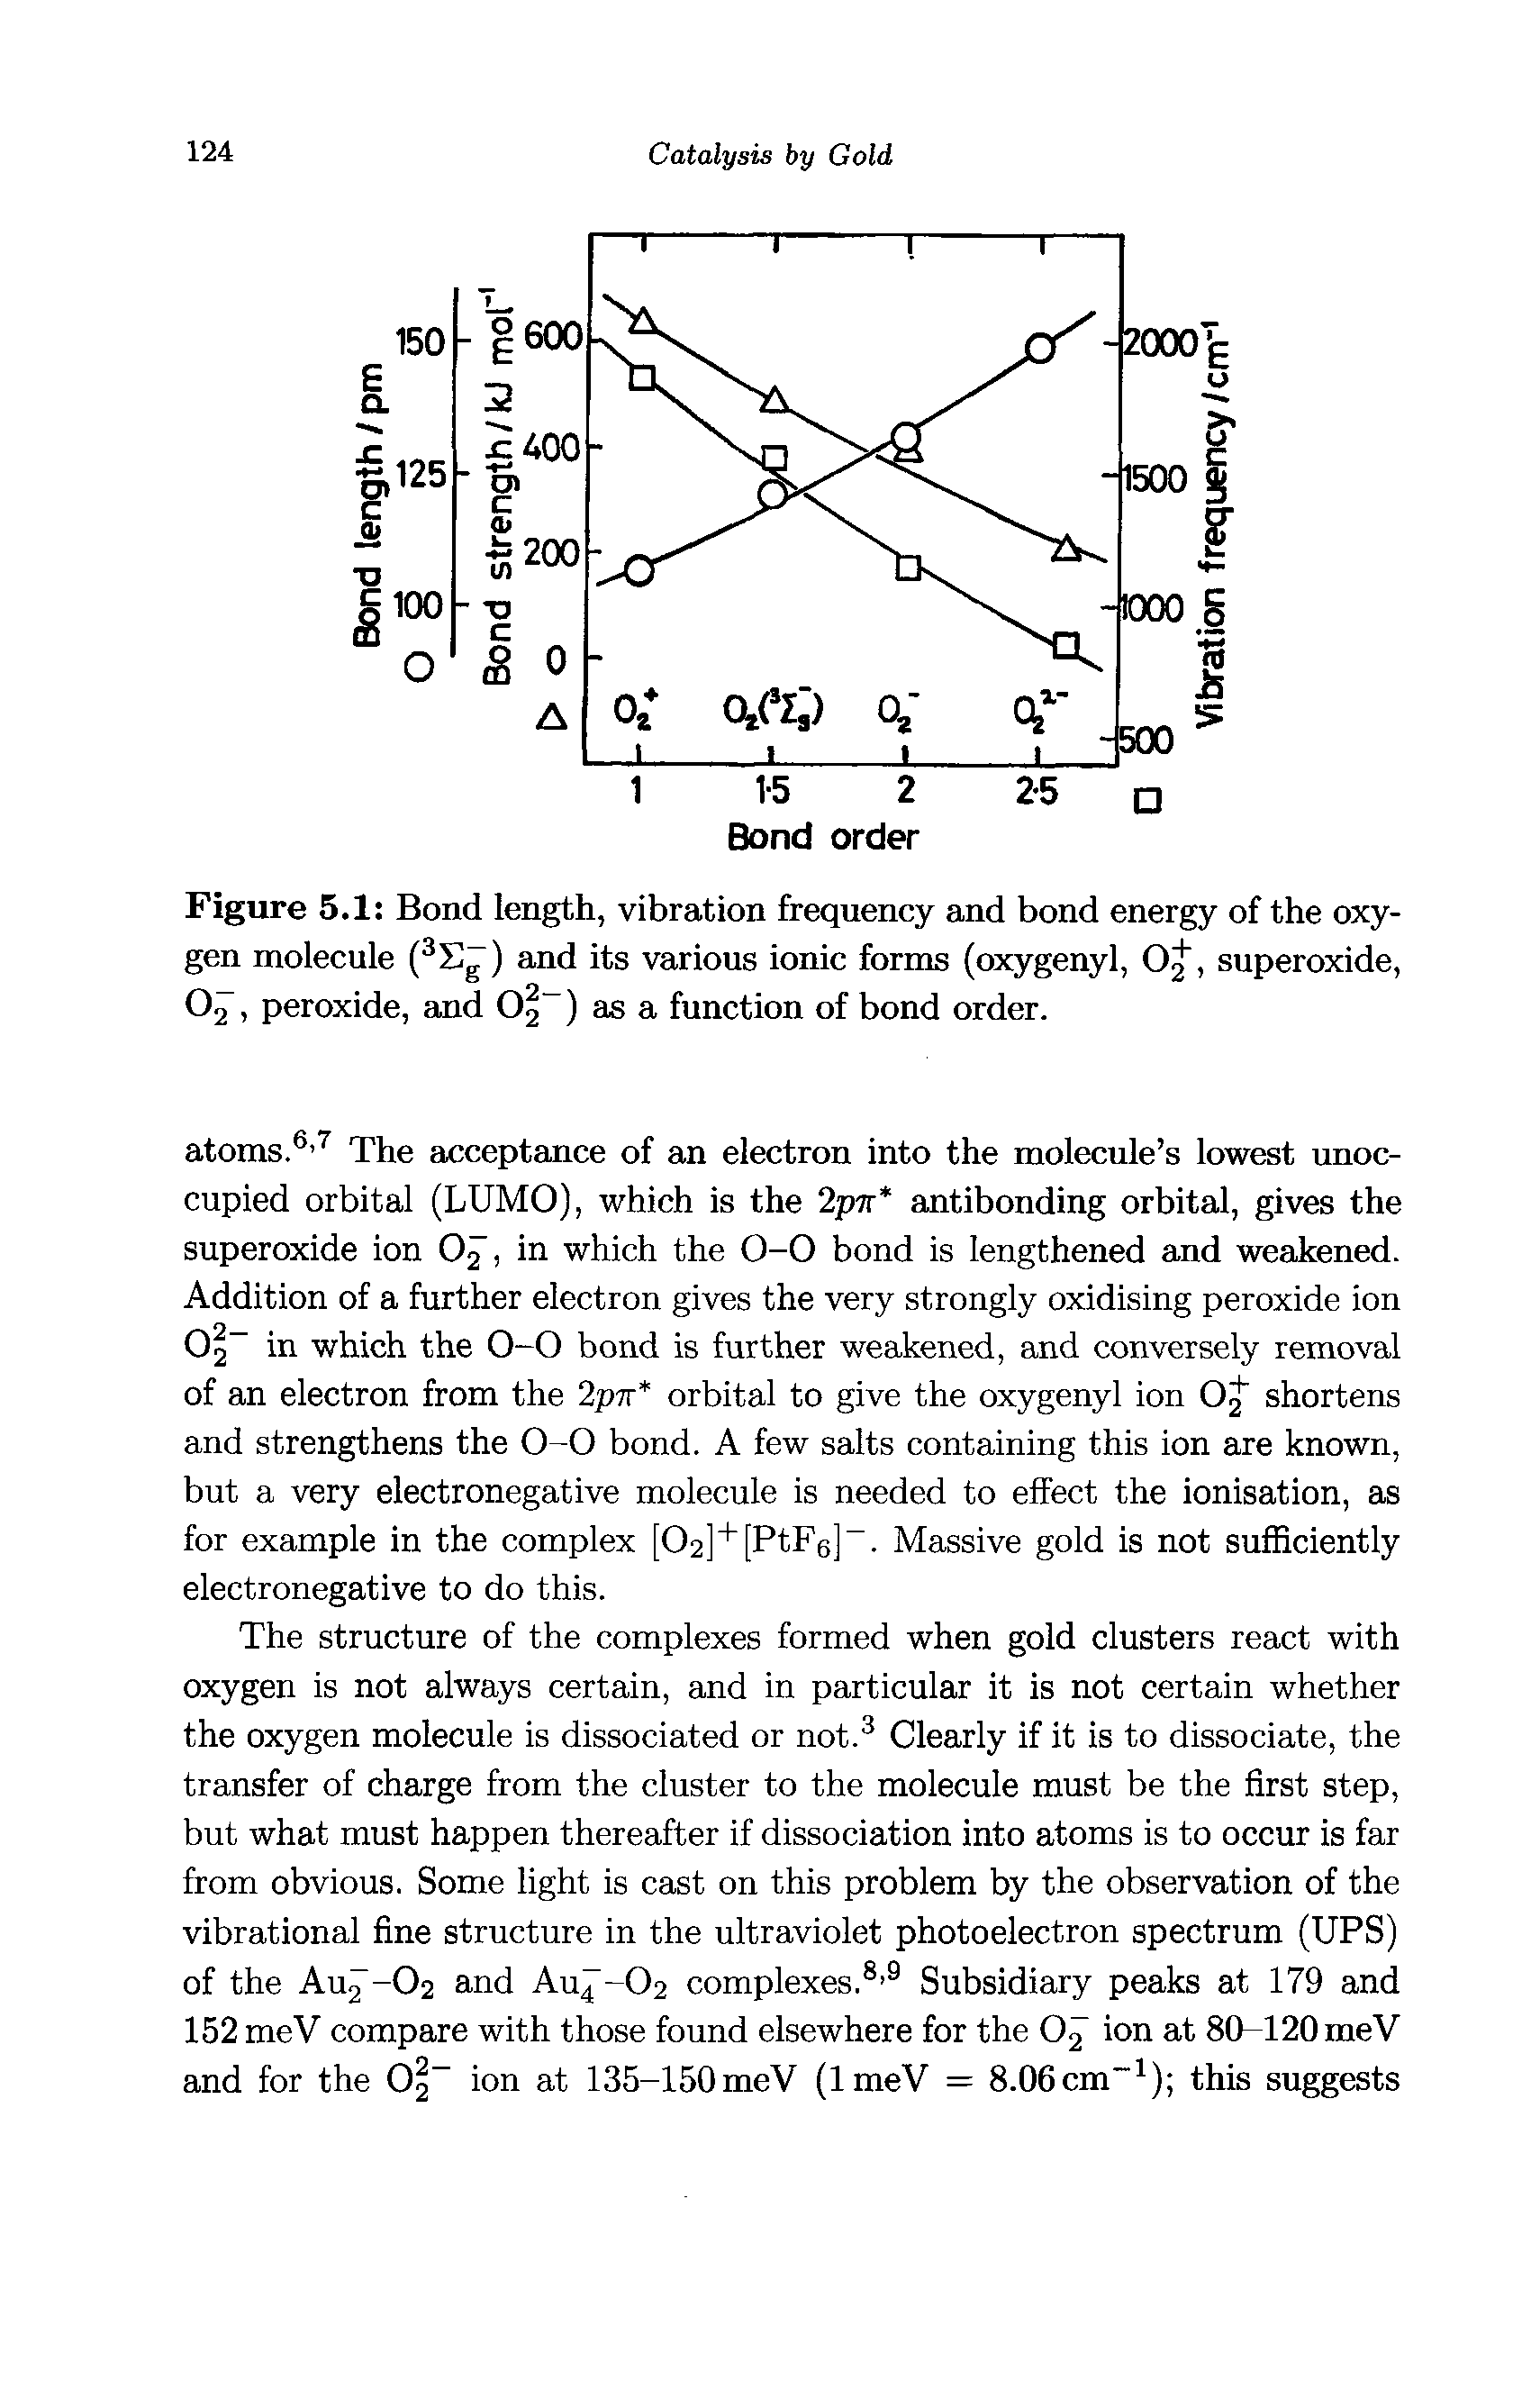 Figure 5.1 Bond length, vibration frequency and bond energy of the oxygen molecule (3E ) and its various ionic forms (oxygenyl, Oj, superoxide, O2, peroxide, and O3") as a function of bond order.